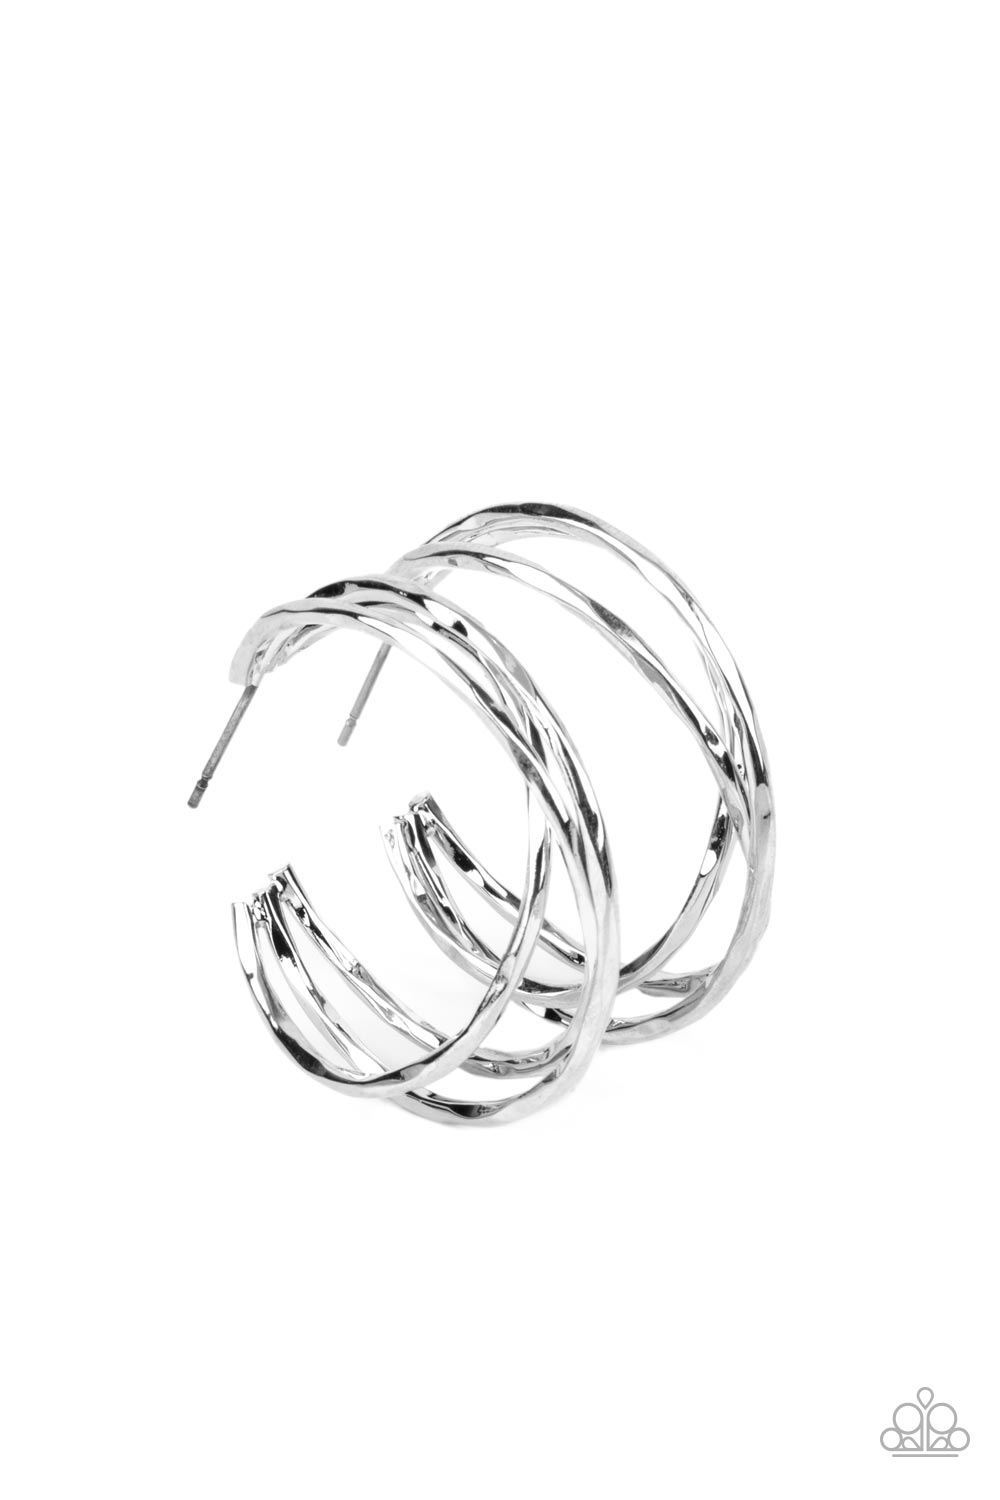 City Contour Silver Hoop Earring - Paparazzi Accessories  Glistening silver bars delicately overlap into a 3-dimensional frame, creating a dramatic hoop. Earring attaches to a standard post fitting. Hoop measures approximately 1" in diameter.  Sold as one pair of hoop earrings.